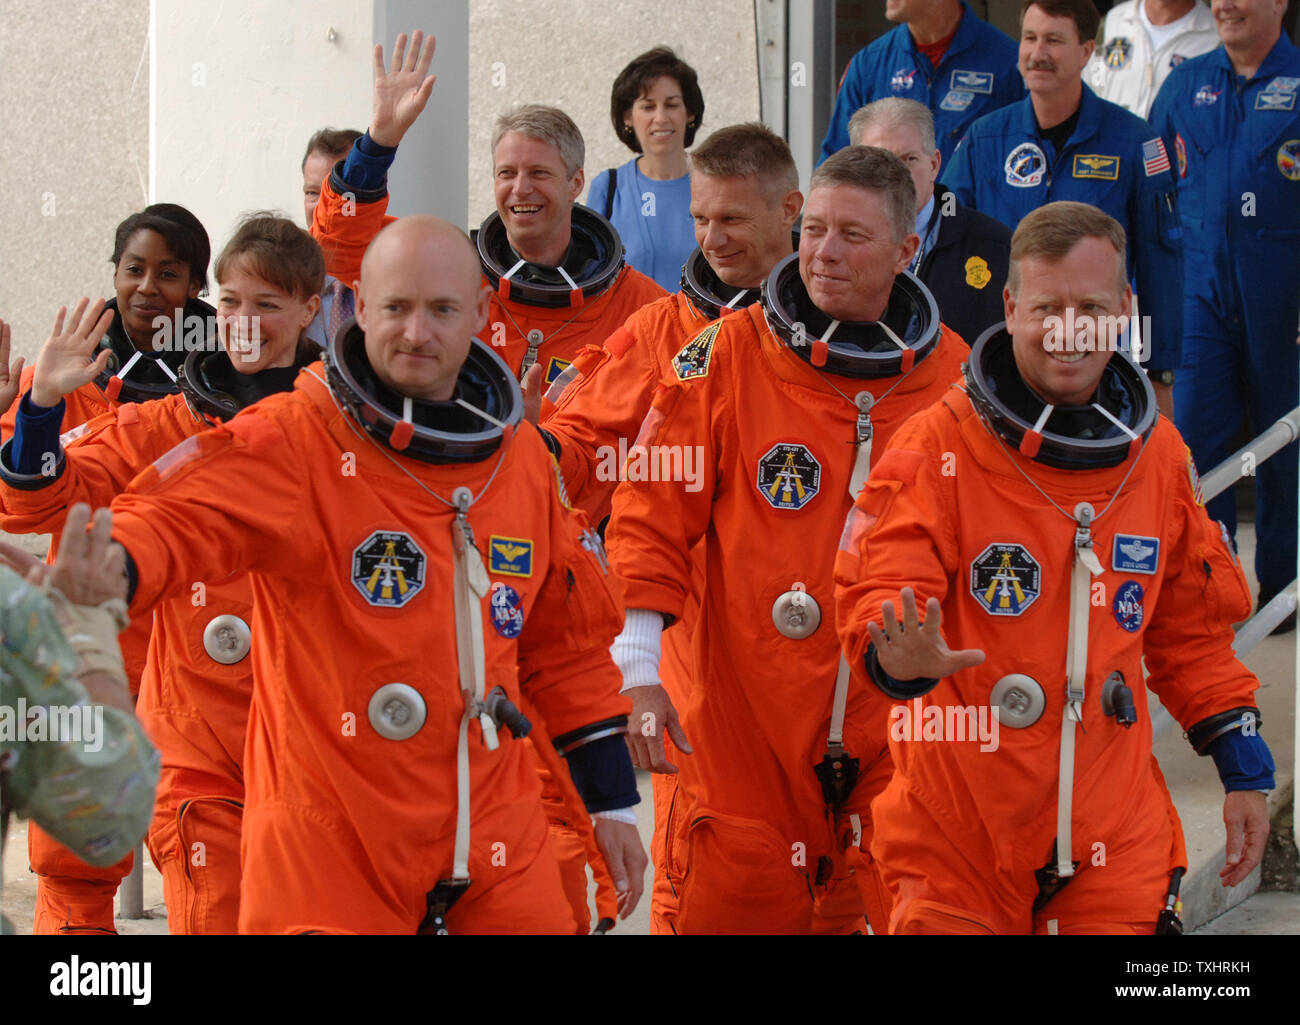 Commander Steven Lindsey (R),Pilot Mark Kelly (L,front) and Mission Specialists  Lisa Nowak (2nd Row,L), Michael Fossum (2nd row,R), Stephanie Wilson (3rd Row,L), Piers Sellers(3rd Row,R), and Thomas Reiter (rear) of Germany, wave to spectators as they walk from the Operations and Checkout Building to board the NASA Astrovan en route to the Space Shuttle Discovery for mission STS-121 at Cape Canaveral, Florida on July 2, 2006.  (UPI Photo/Pat Benic) Stock Photo